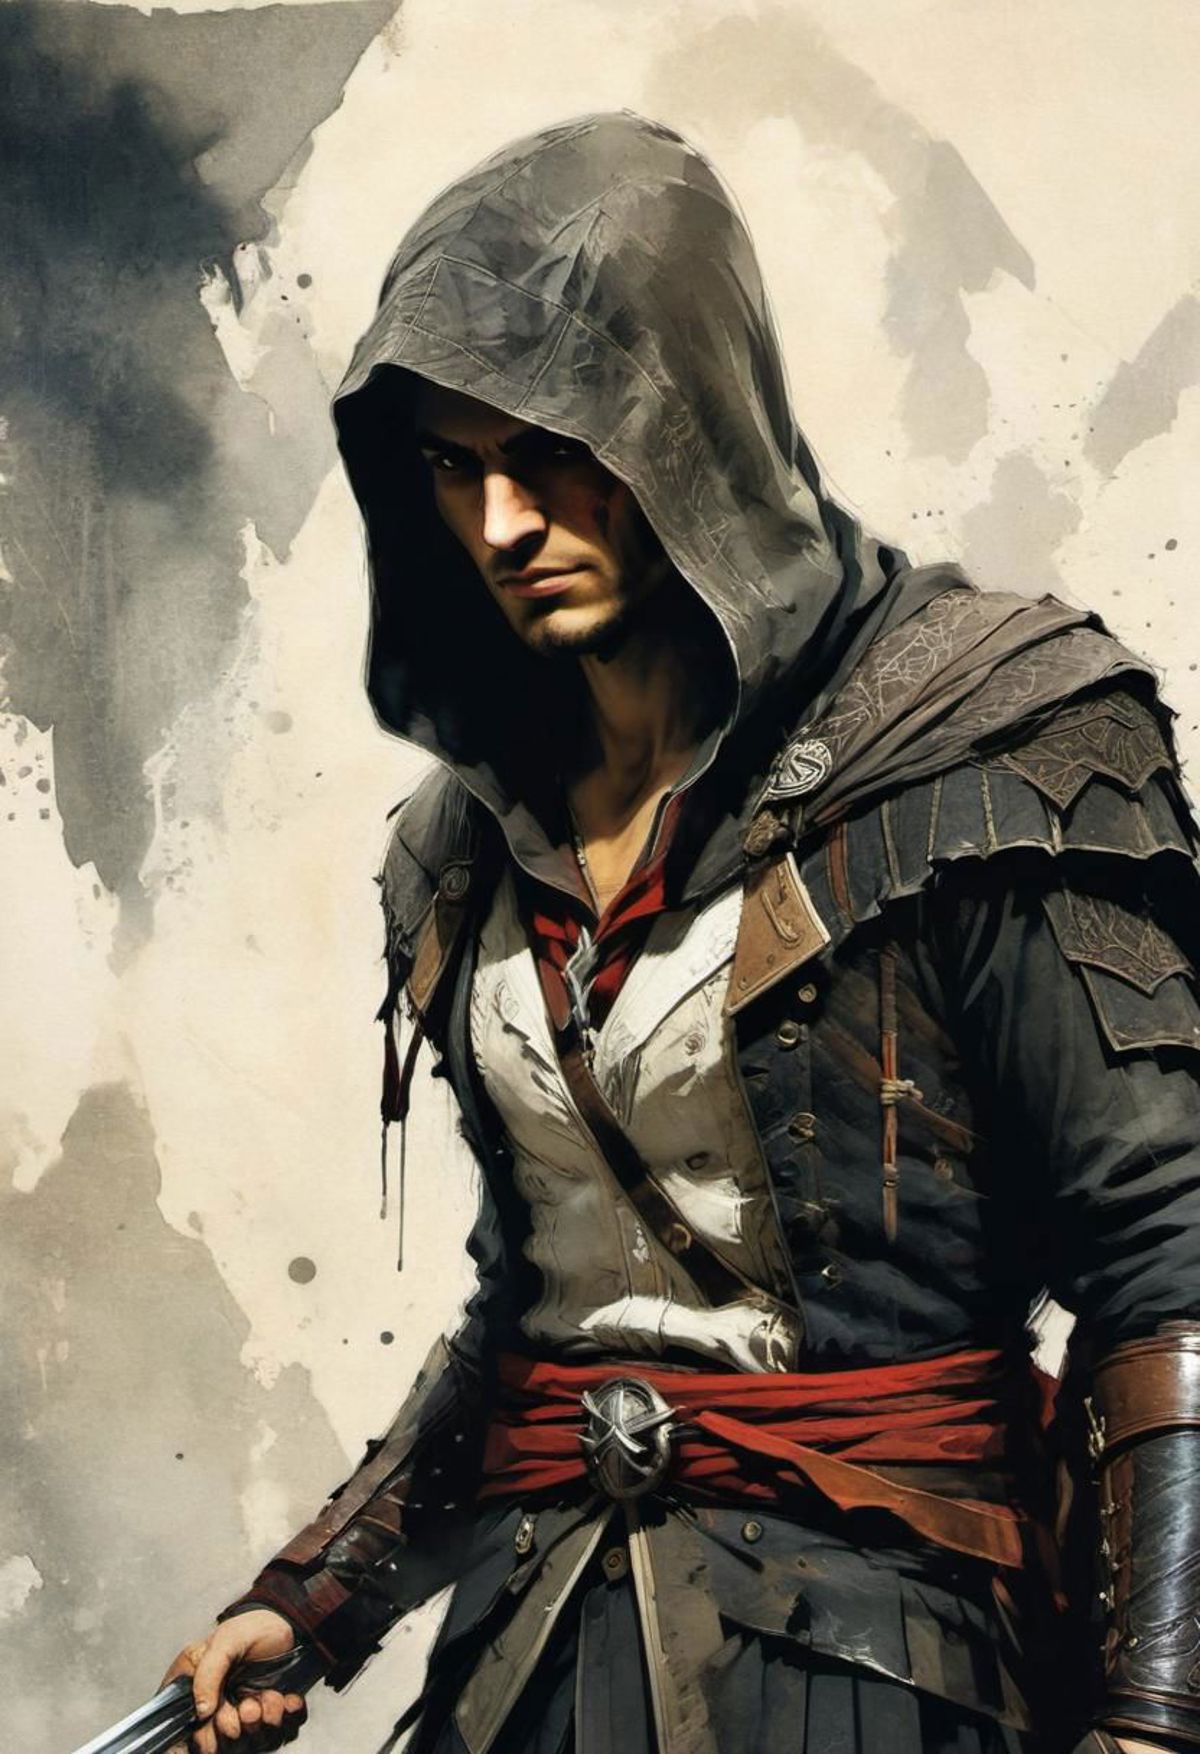 The image features a man dressed in a black and white outfit, resembling a character from Assassin's Creed. He is wearing a hooded cape and a sword, which is visible on his hip. The man appears to be standing in a room with a wall behind him, possibly a painting or a mural. The overall scene gives off a sense of mystery and intrigue, as the man seems to be a skilled warrior or assassin.